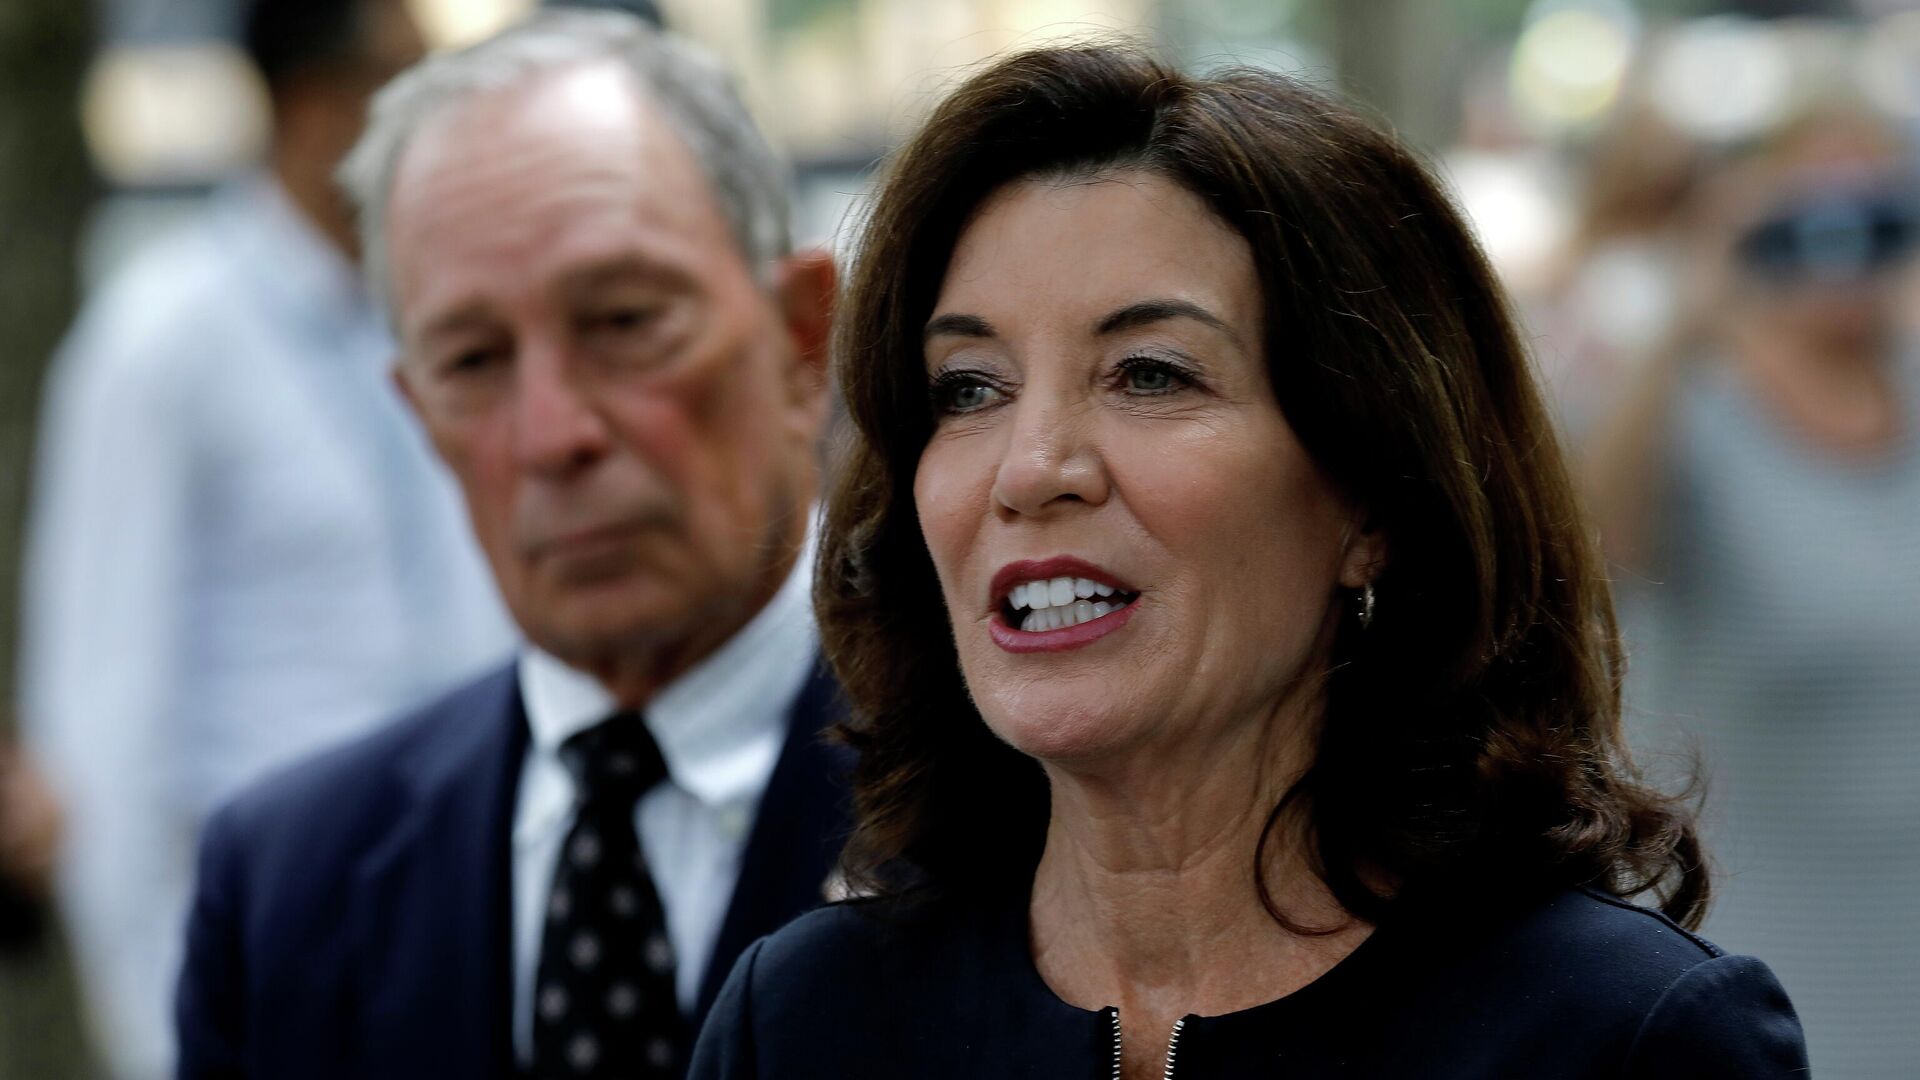 New York Governor Kathy Hochul along with former New York City Mayor and Chairman of the 9/11 Memorial & Museum Michael Bloomberg, speak to the press after visiting the Memorial ahead of the 20th anniversary of the 9/11 attacks in lower Manhattan in New York City, New York, U.S., September 8, 2021. - Sputnik International, 1920, 09.09.2021